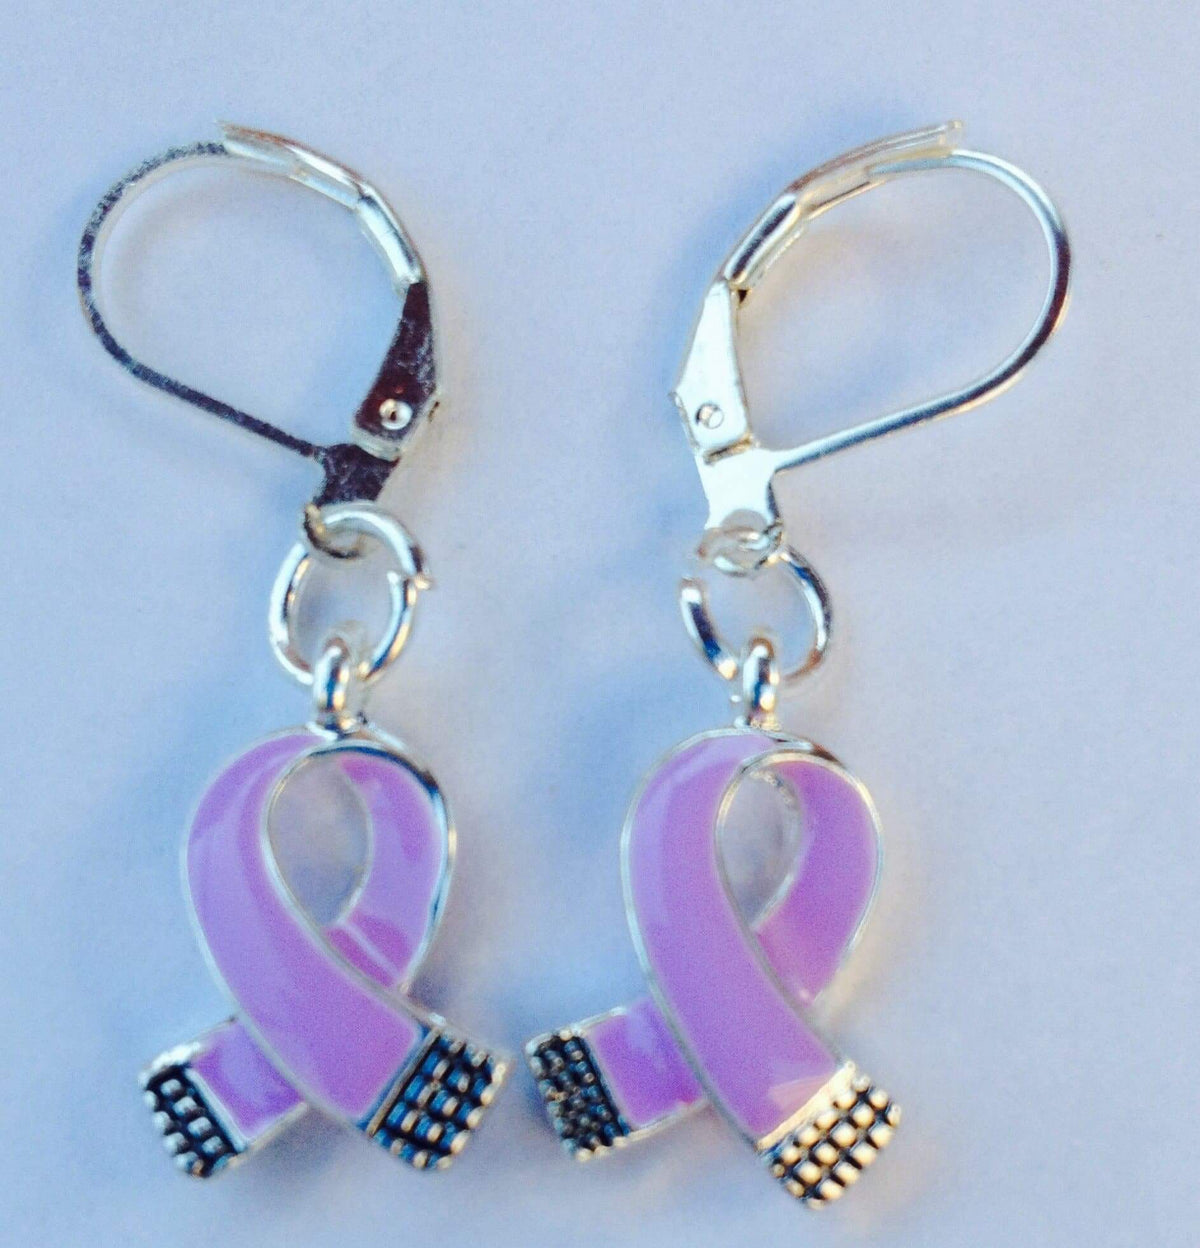 Purple Charm Earrings for many Causes - The House of Awareness